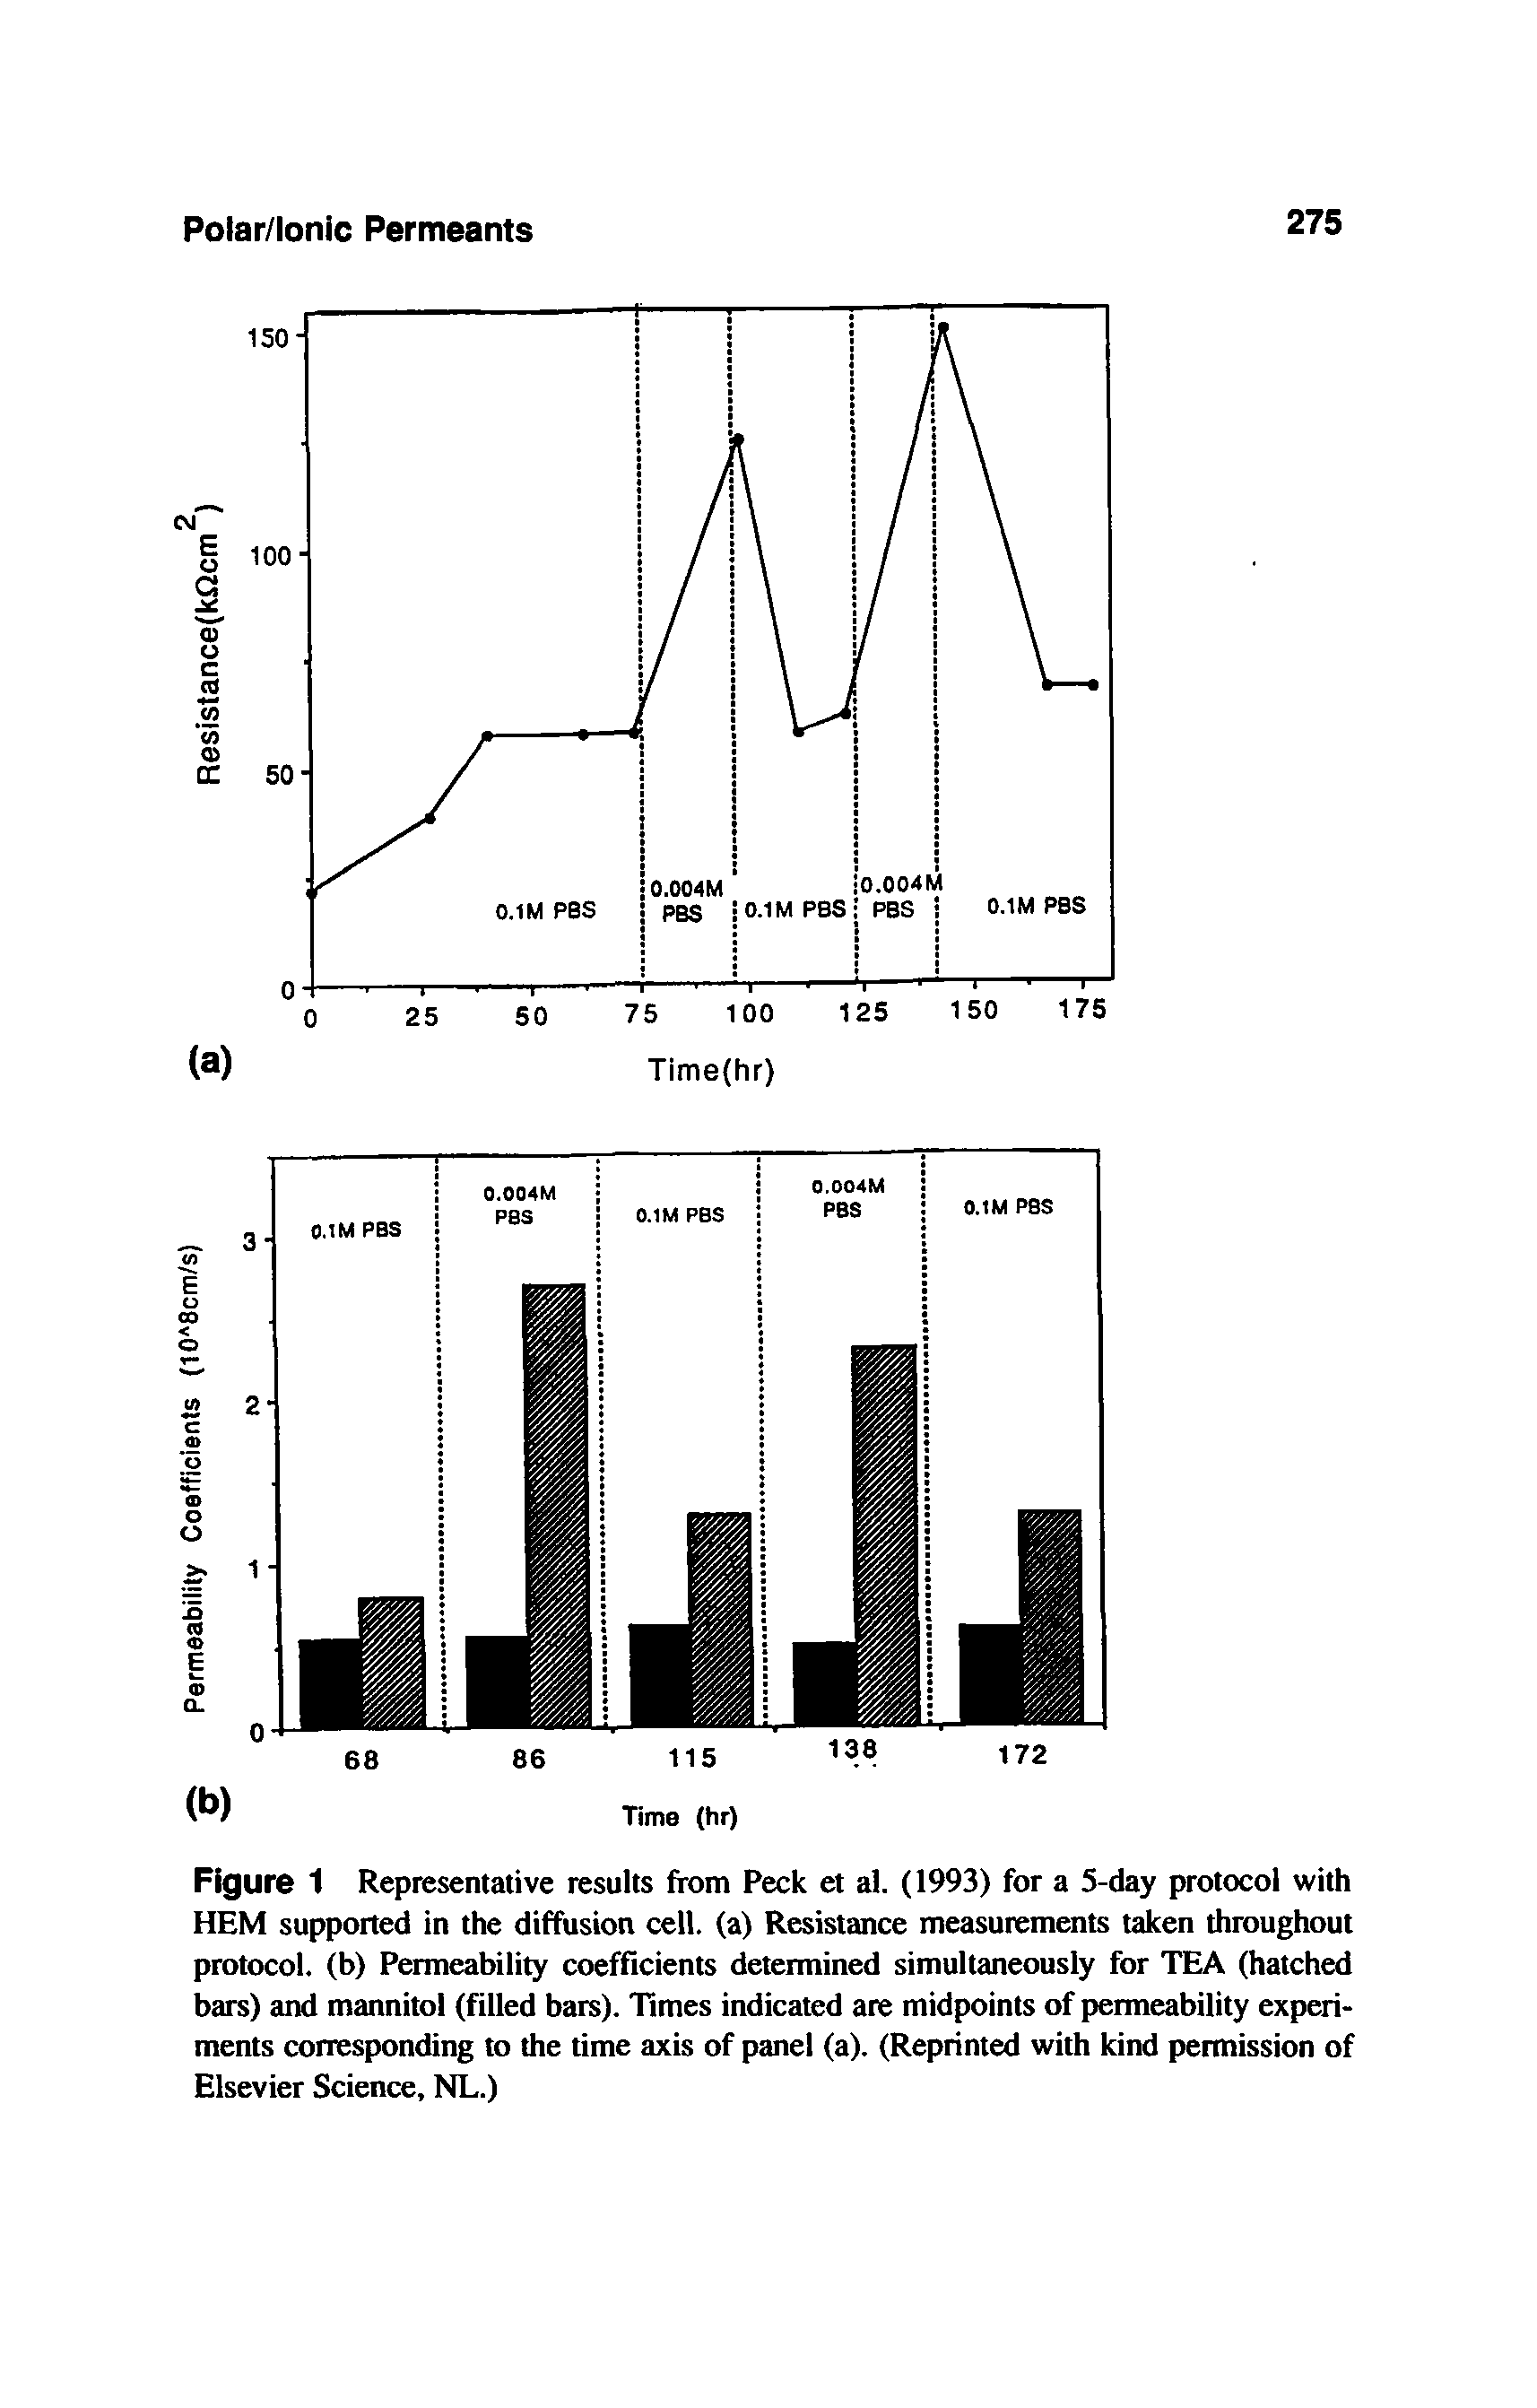 Figure 1 Representative results from Peck et al. (1993) for a 5-day protocol with HEM supported in the diffusion cell, (a) Resistance measurements taken throughout protocol, (b) Permeability coefficients determined simultaneously for TEA (hatched bars) and mannitol (filled bars). Times indicated are midpoints of permeability experiments corresponding to the time axis of panel (a). (Reprinted with kind permission of Elsevier Science, ML.)...